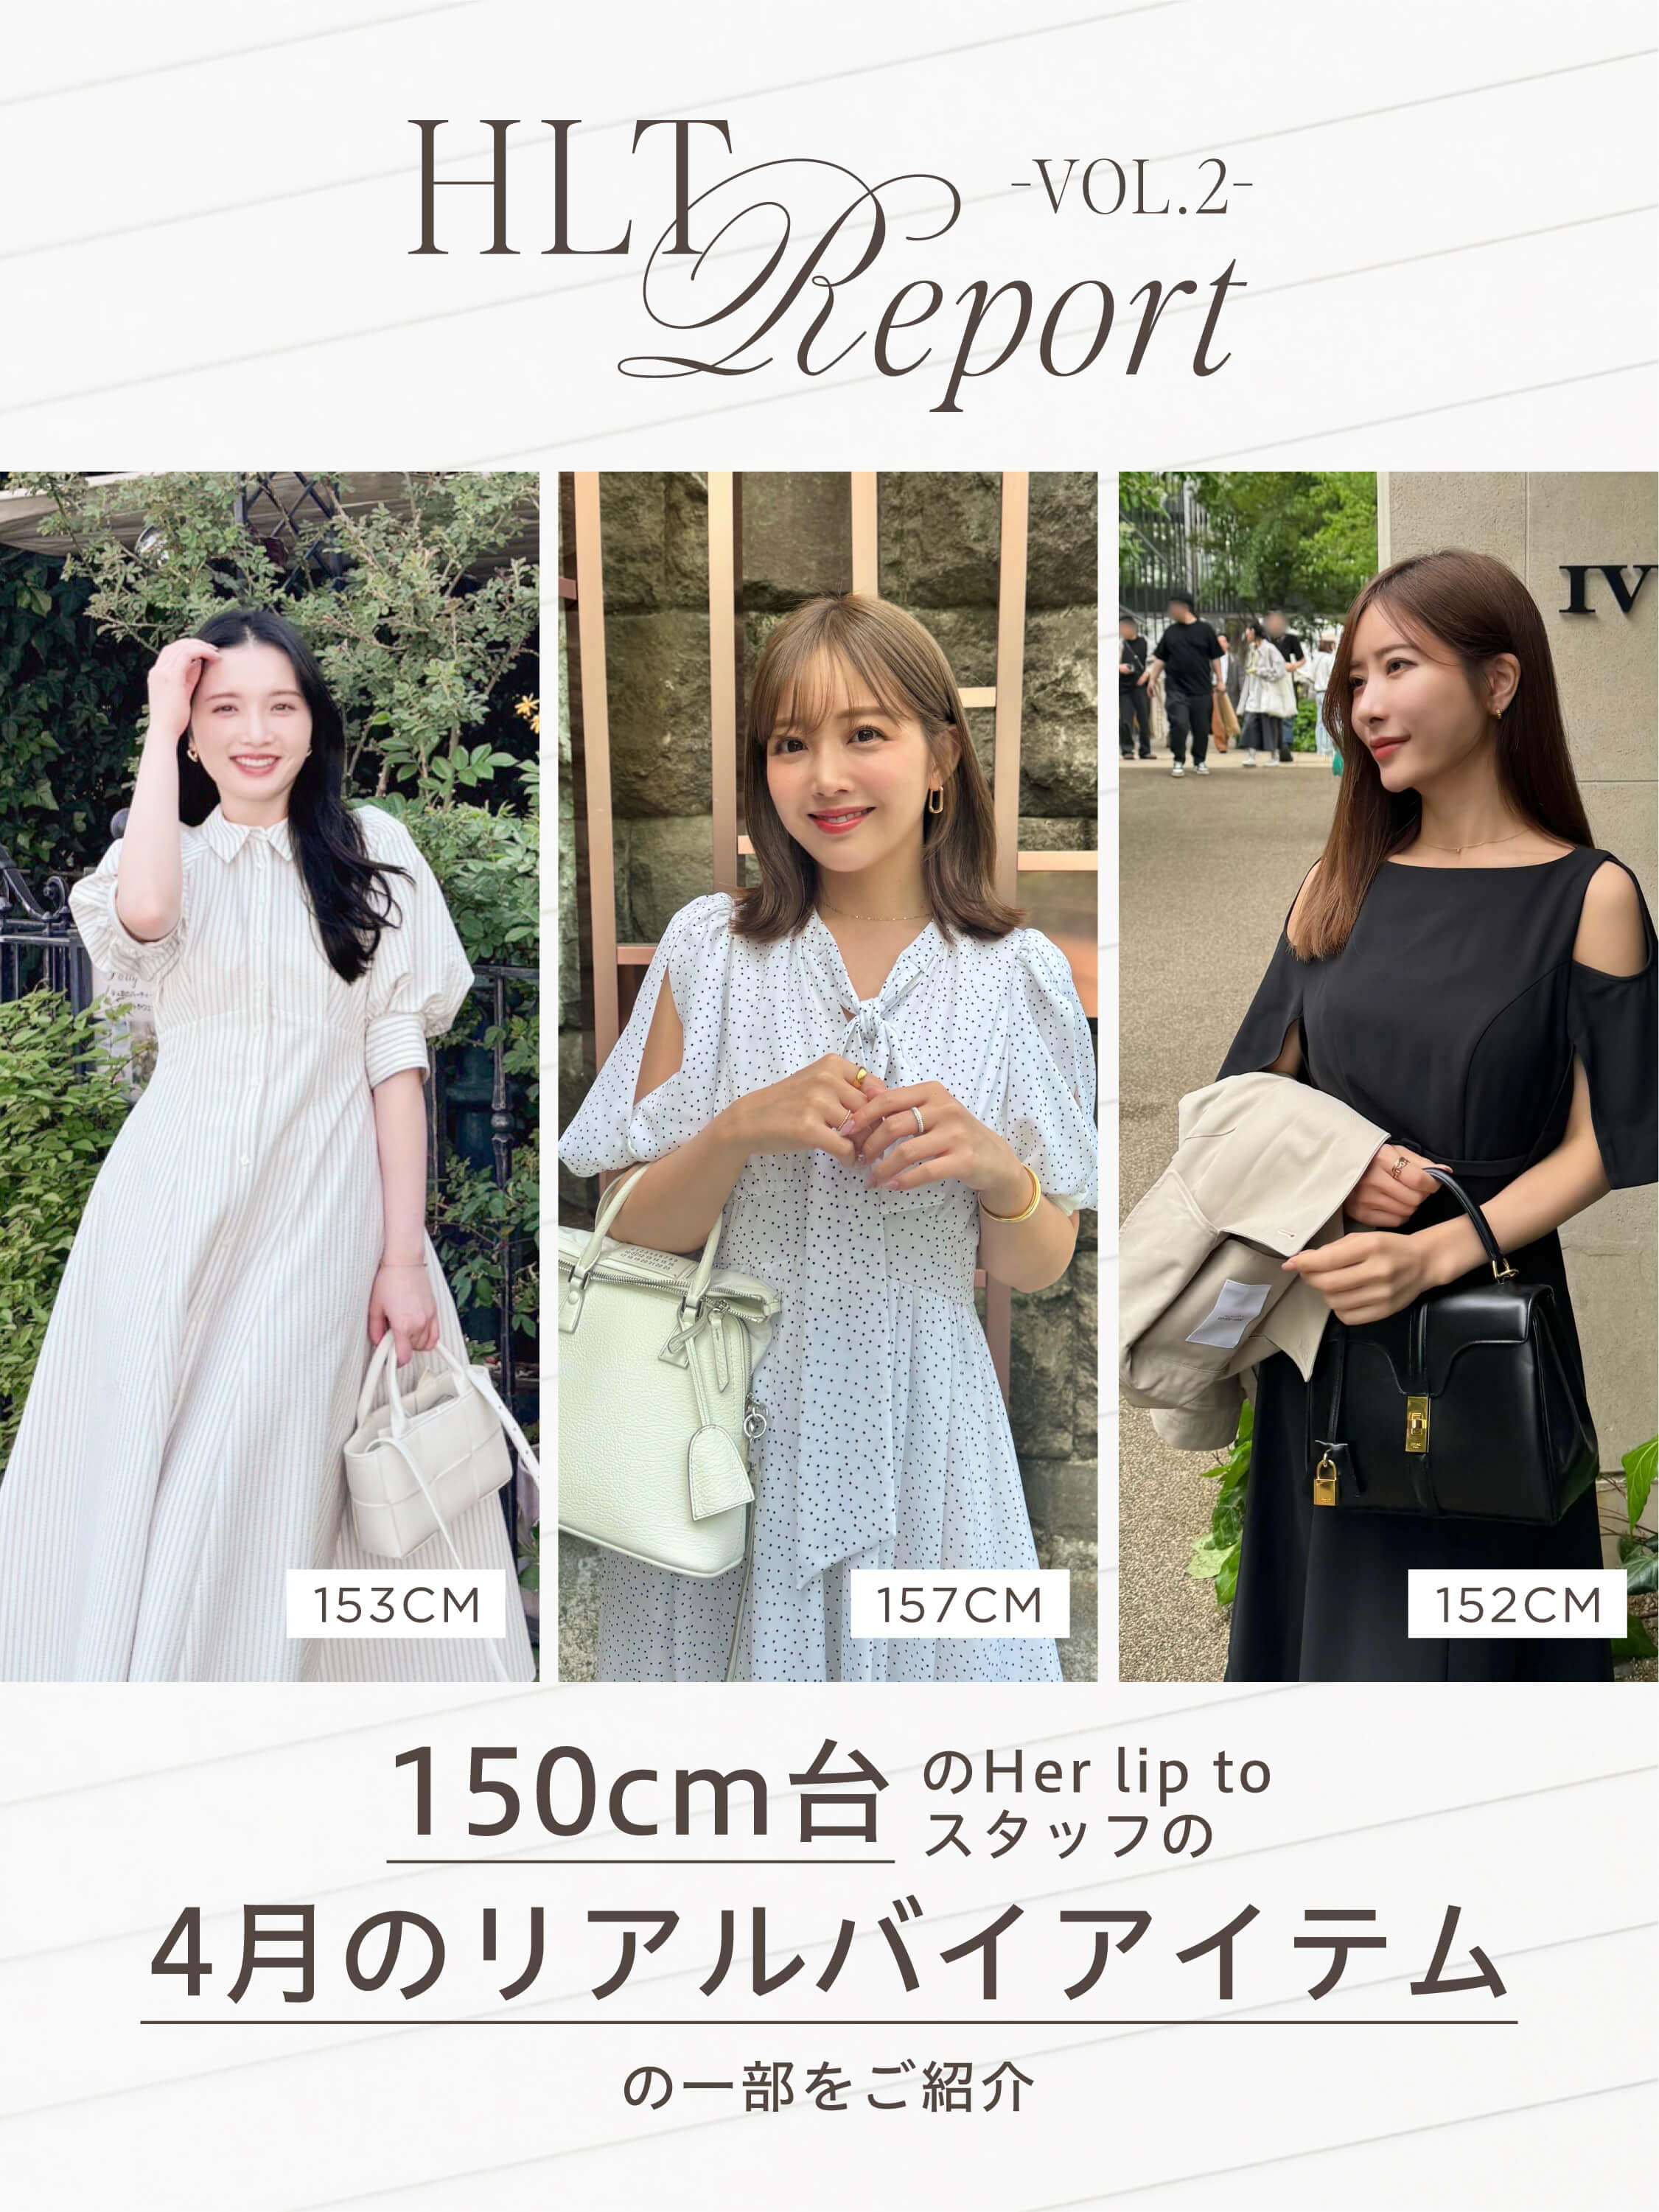 HLT REPORT VOL.2】Her lip to STAFF'S REAL BUY ITEMS